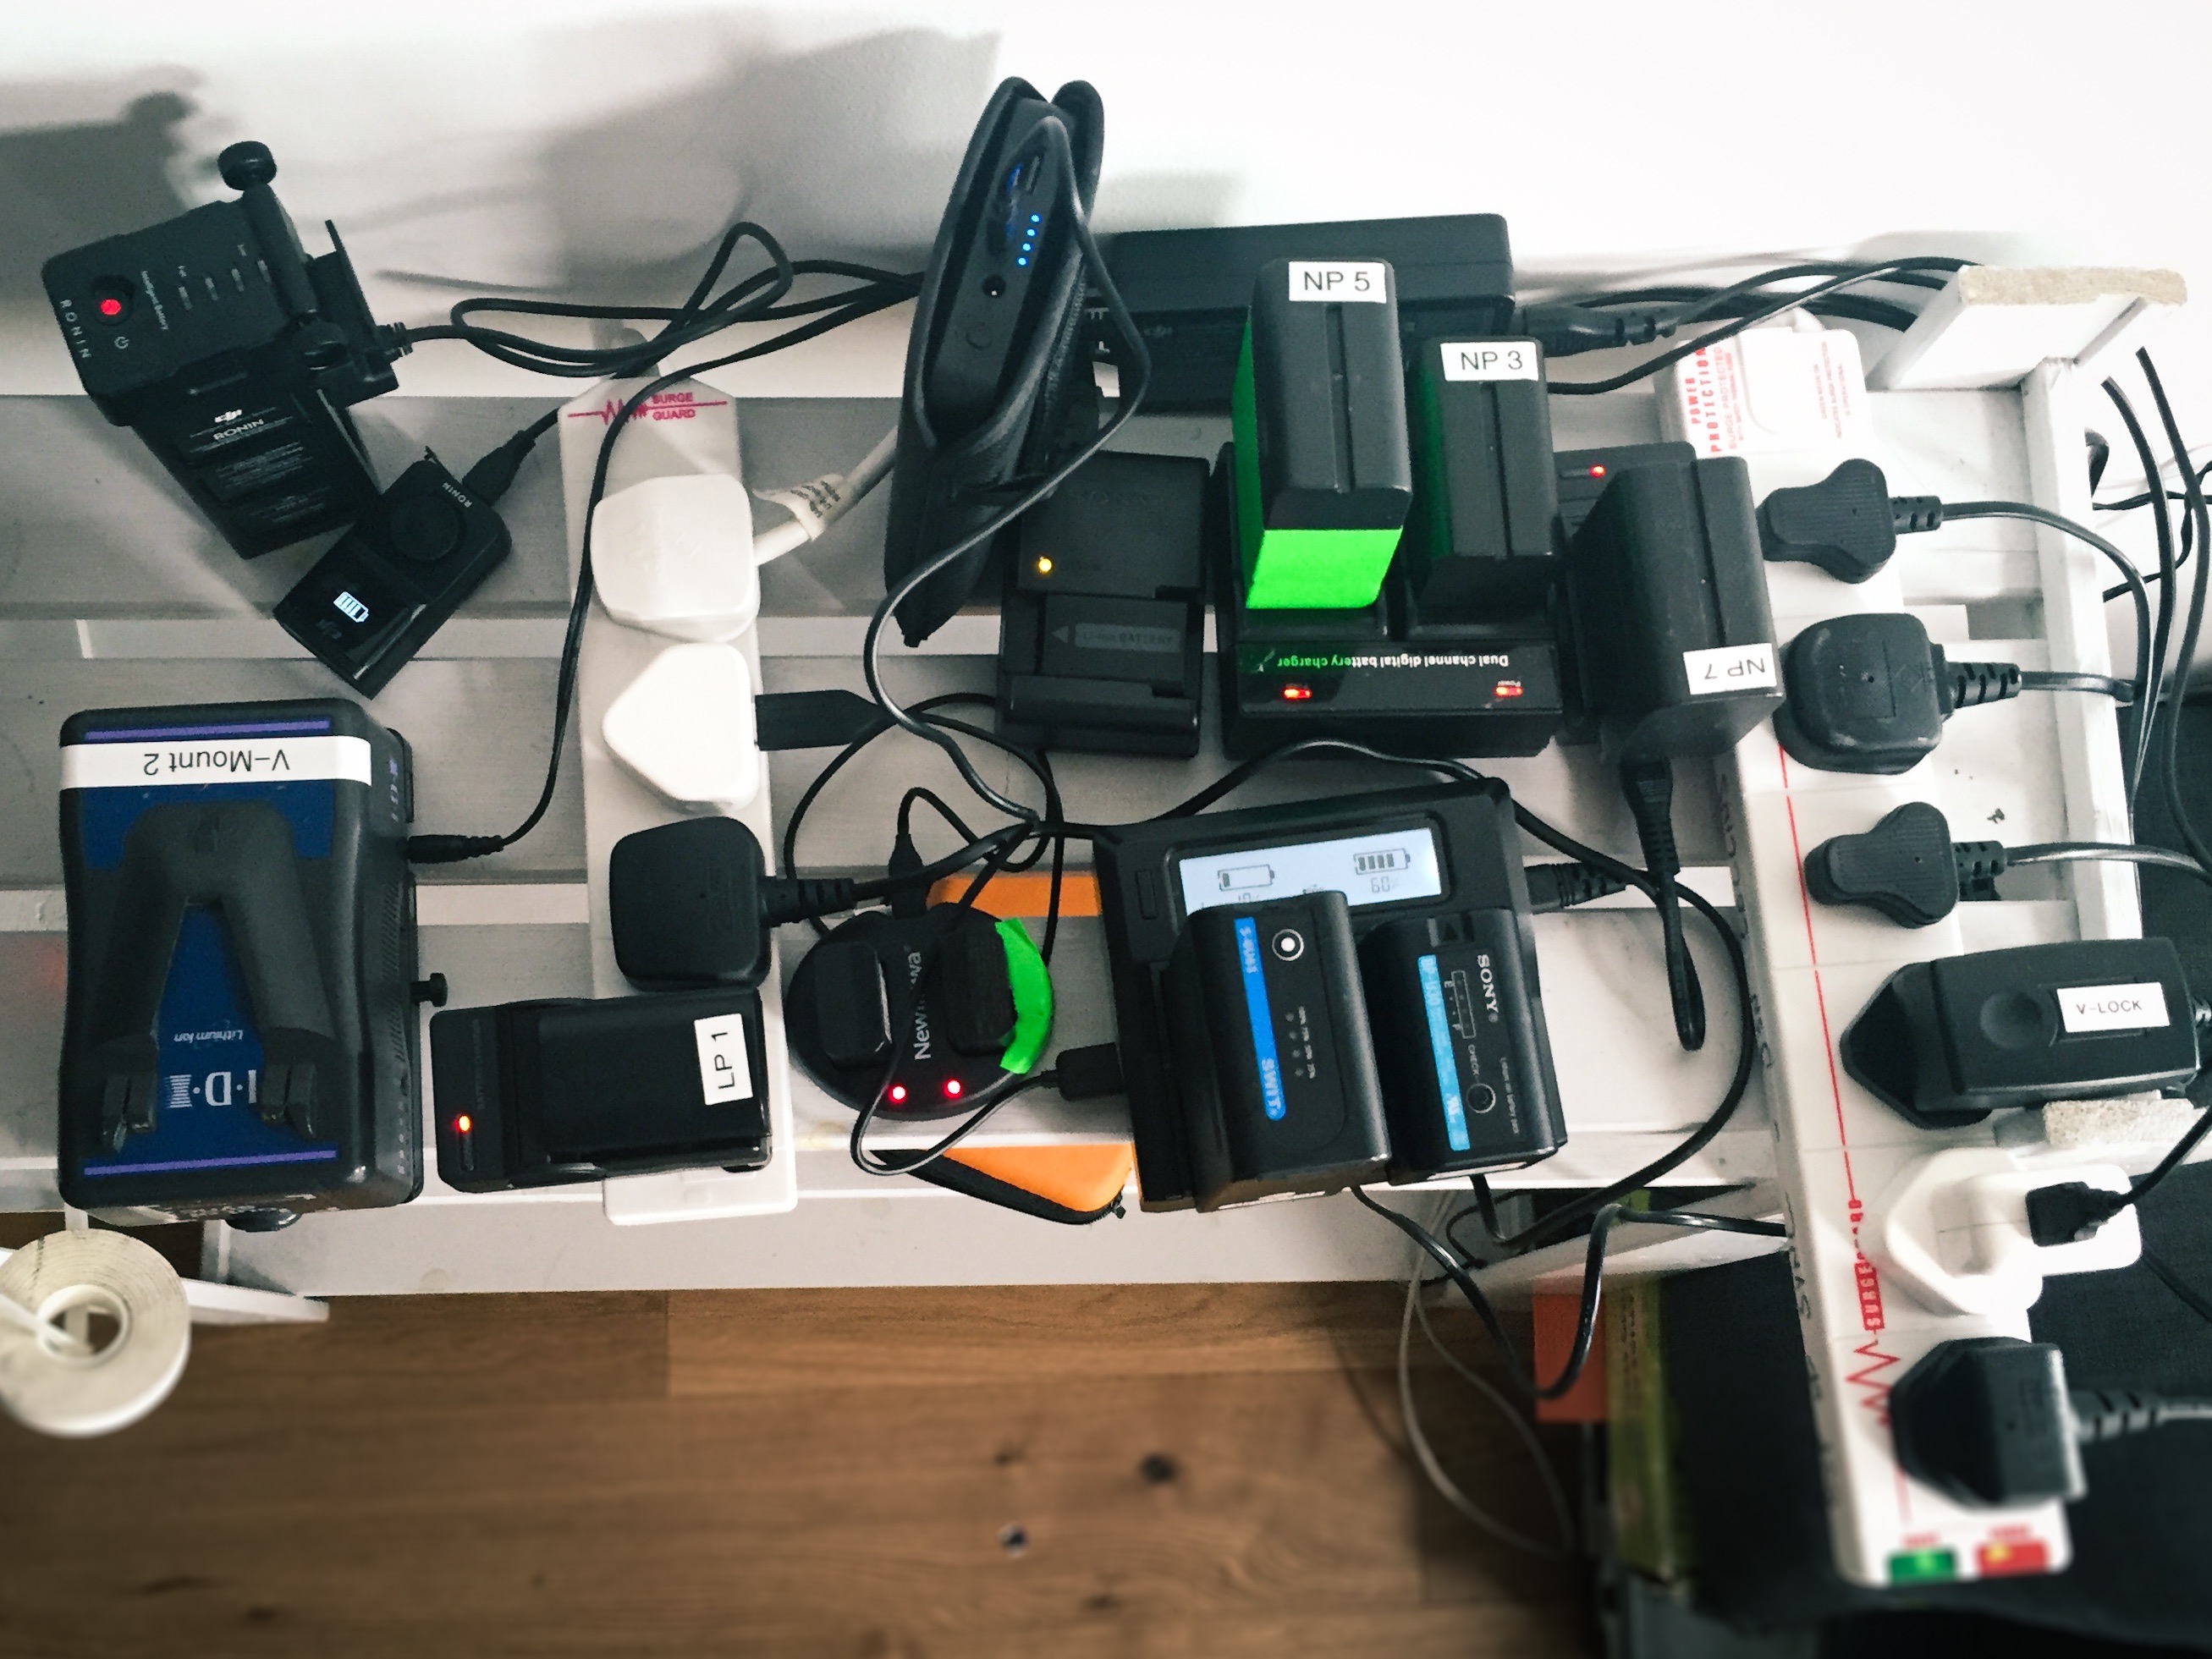 The problem: 8 different battery types